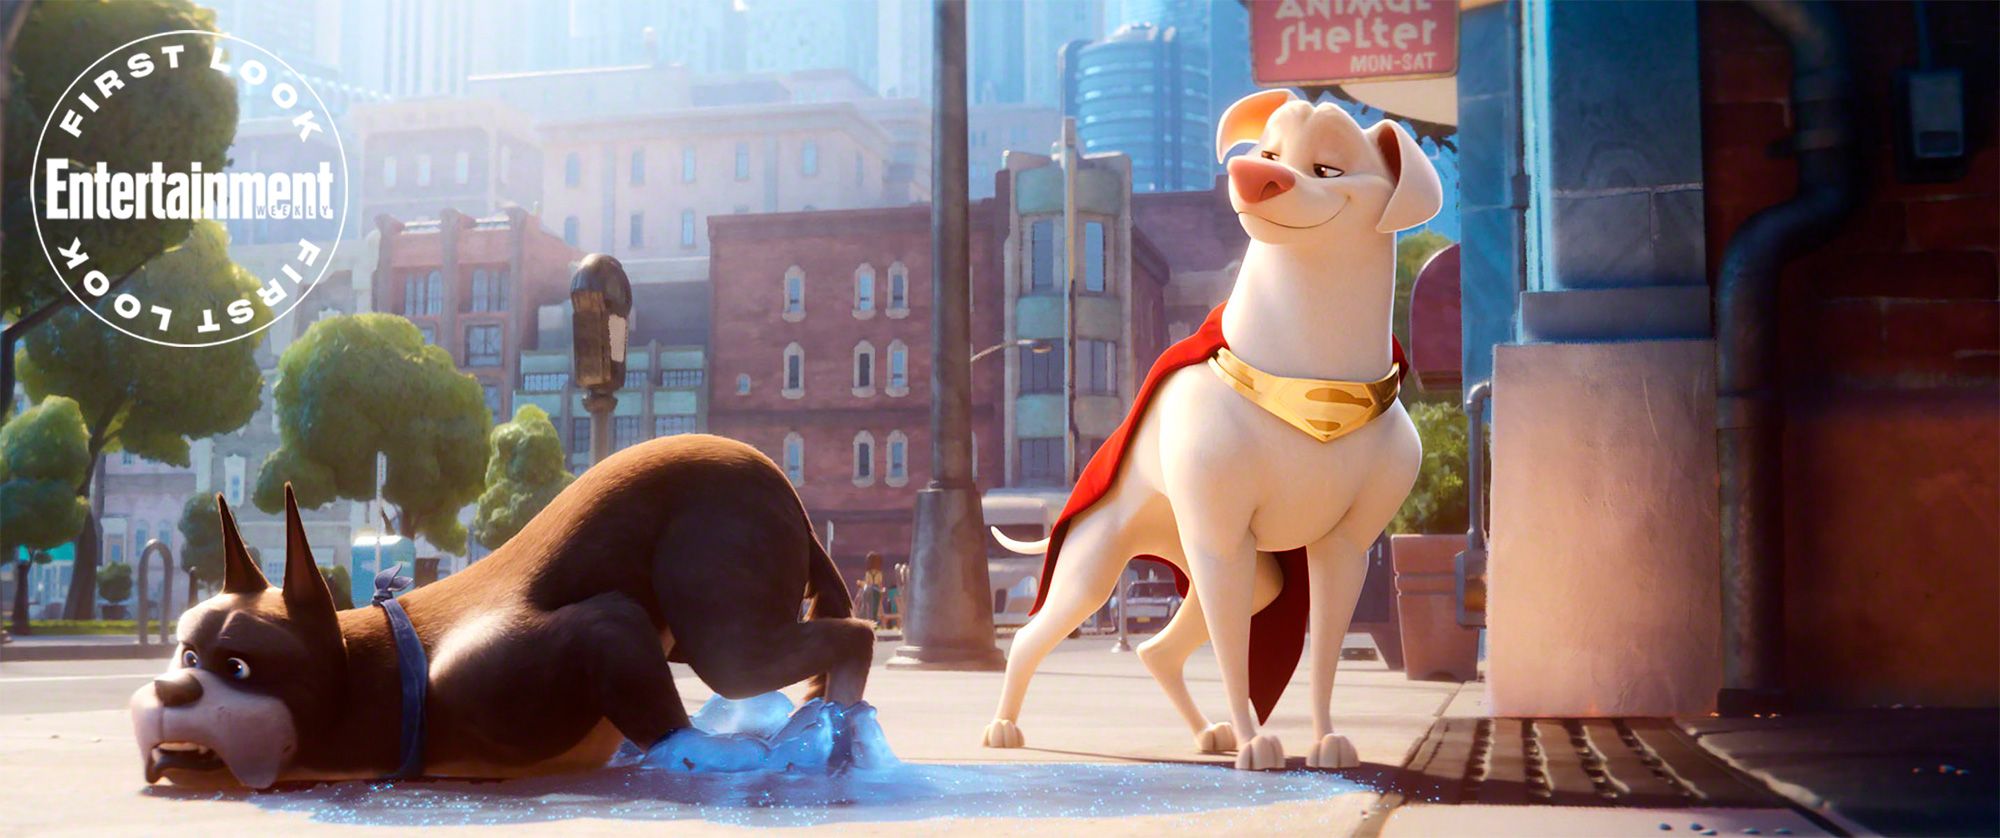 DC's Super Pets: First Look at Krypto the Superdog In Animated Movie  Revealed